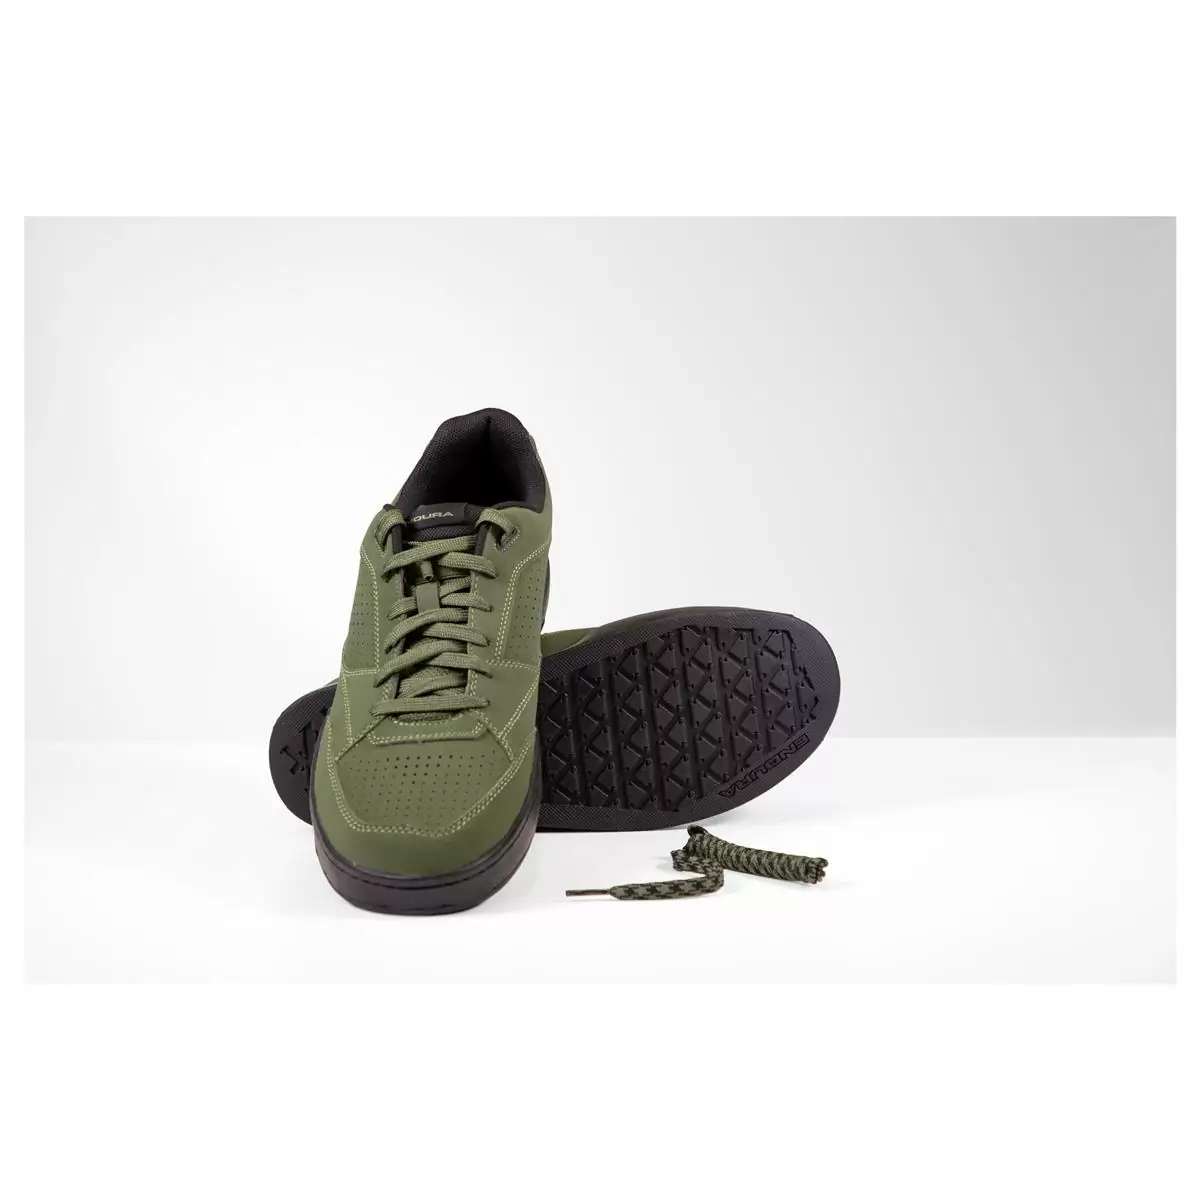 Hummvee Flat Pedal Shoes Green Size 41,5 #3